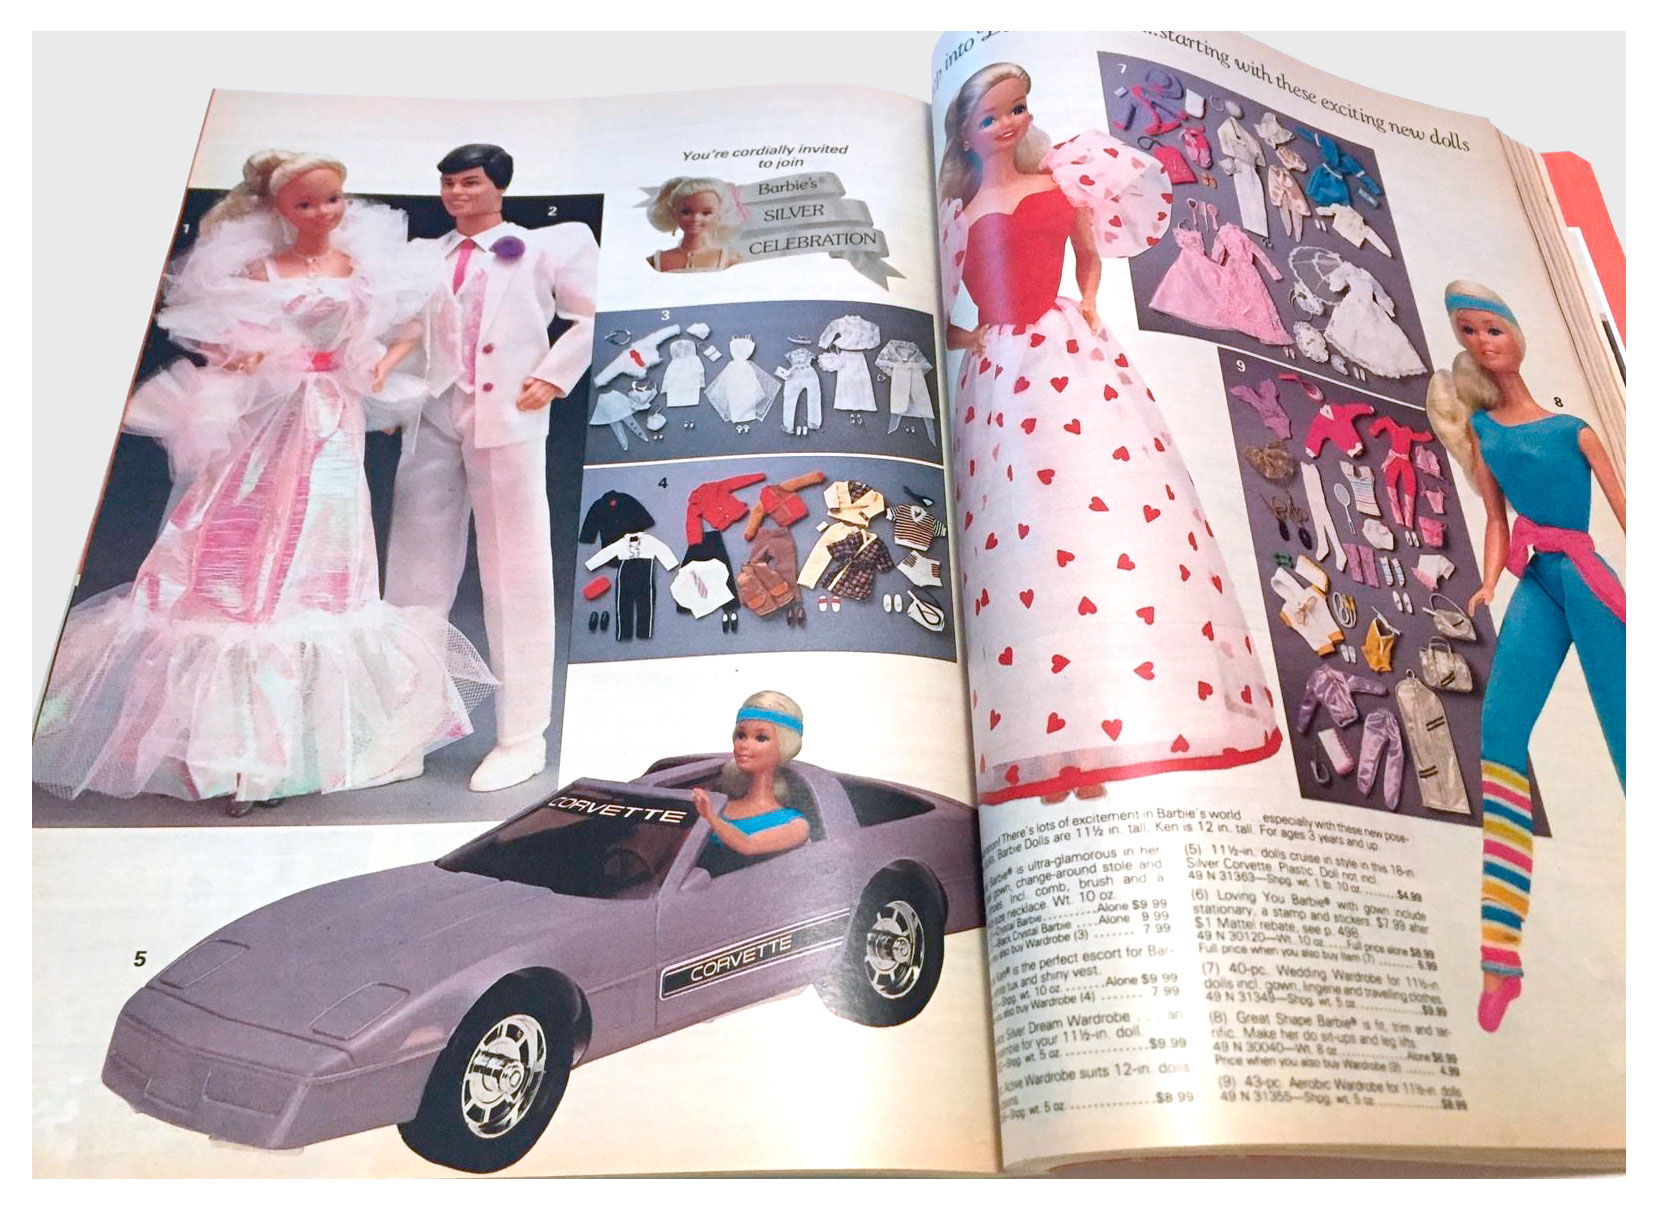 magazine - ..starting with these exciting new citing new dolls You're cordially invited to join Barbie's Silver Celebration 48 .. 219VETTE lots of excitement in Barbie e's lots with the 12 717 in tall, Ken is 12 in Tall Foto 51 Barbie Dolls are 11% tragla